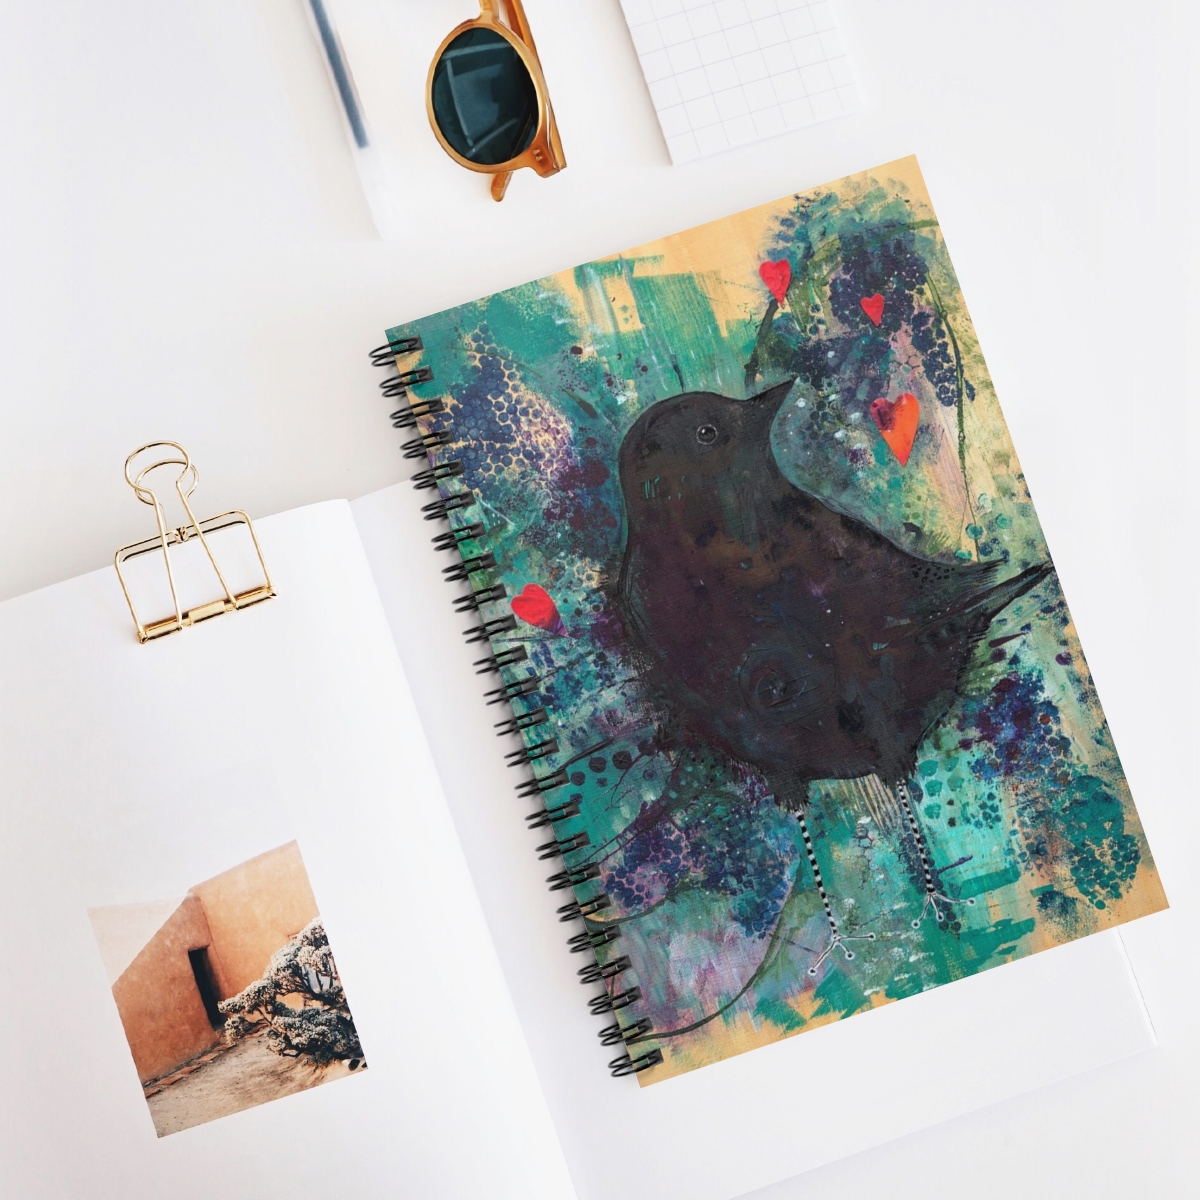 Special crow journal - this picture shows the crow notebook in context. The image on the notebook is a crow emerging from turquoise and purple toned and textured background. 3 red hearts float above him.